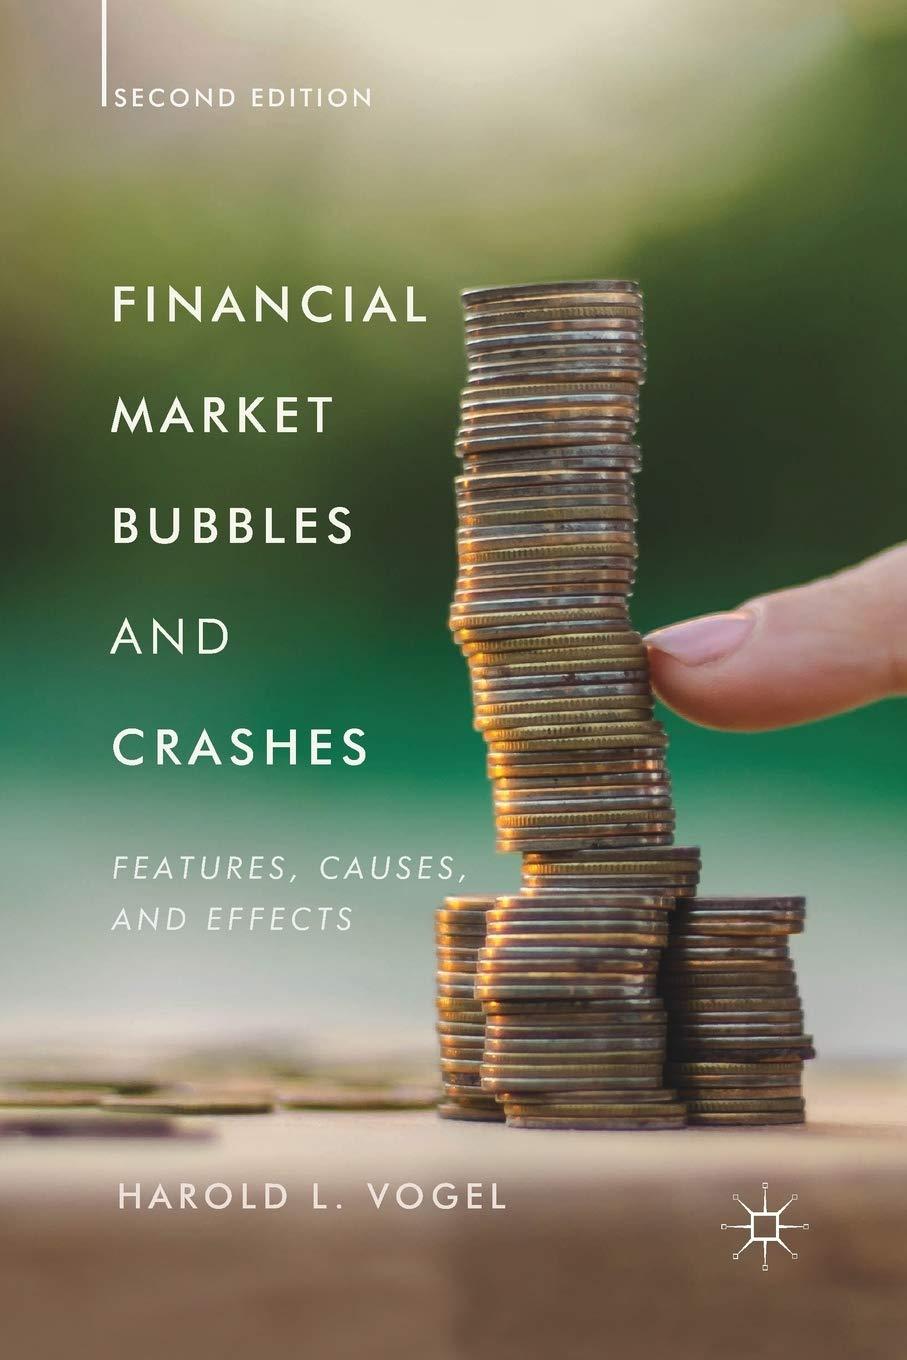 financial market bubbles and crashes features causes and effects 2nd edition harold l. vogel 3319715275,